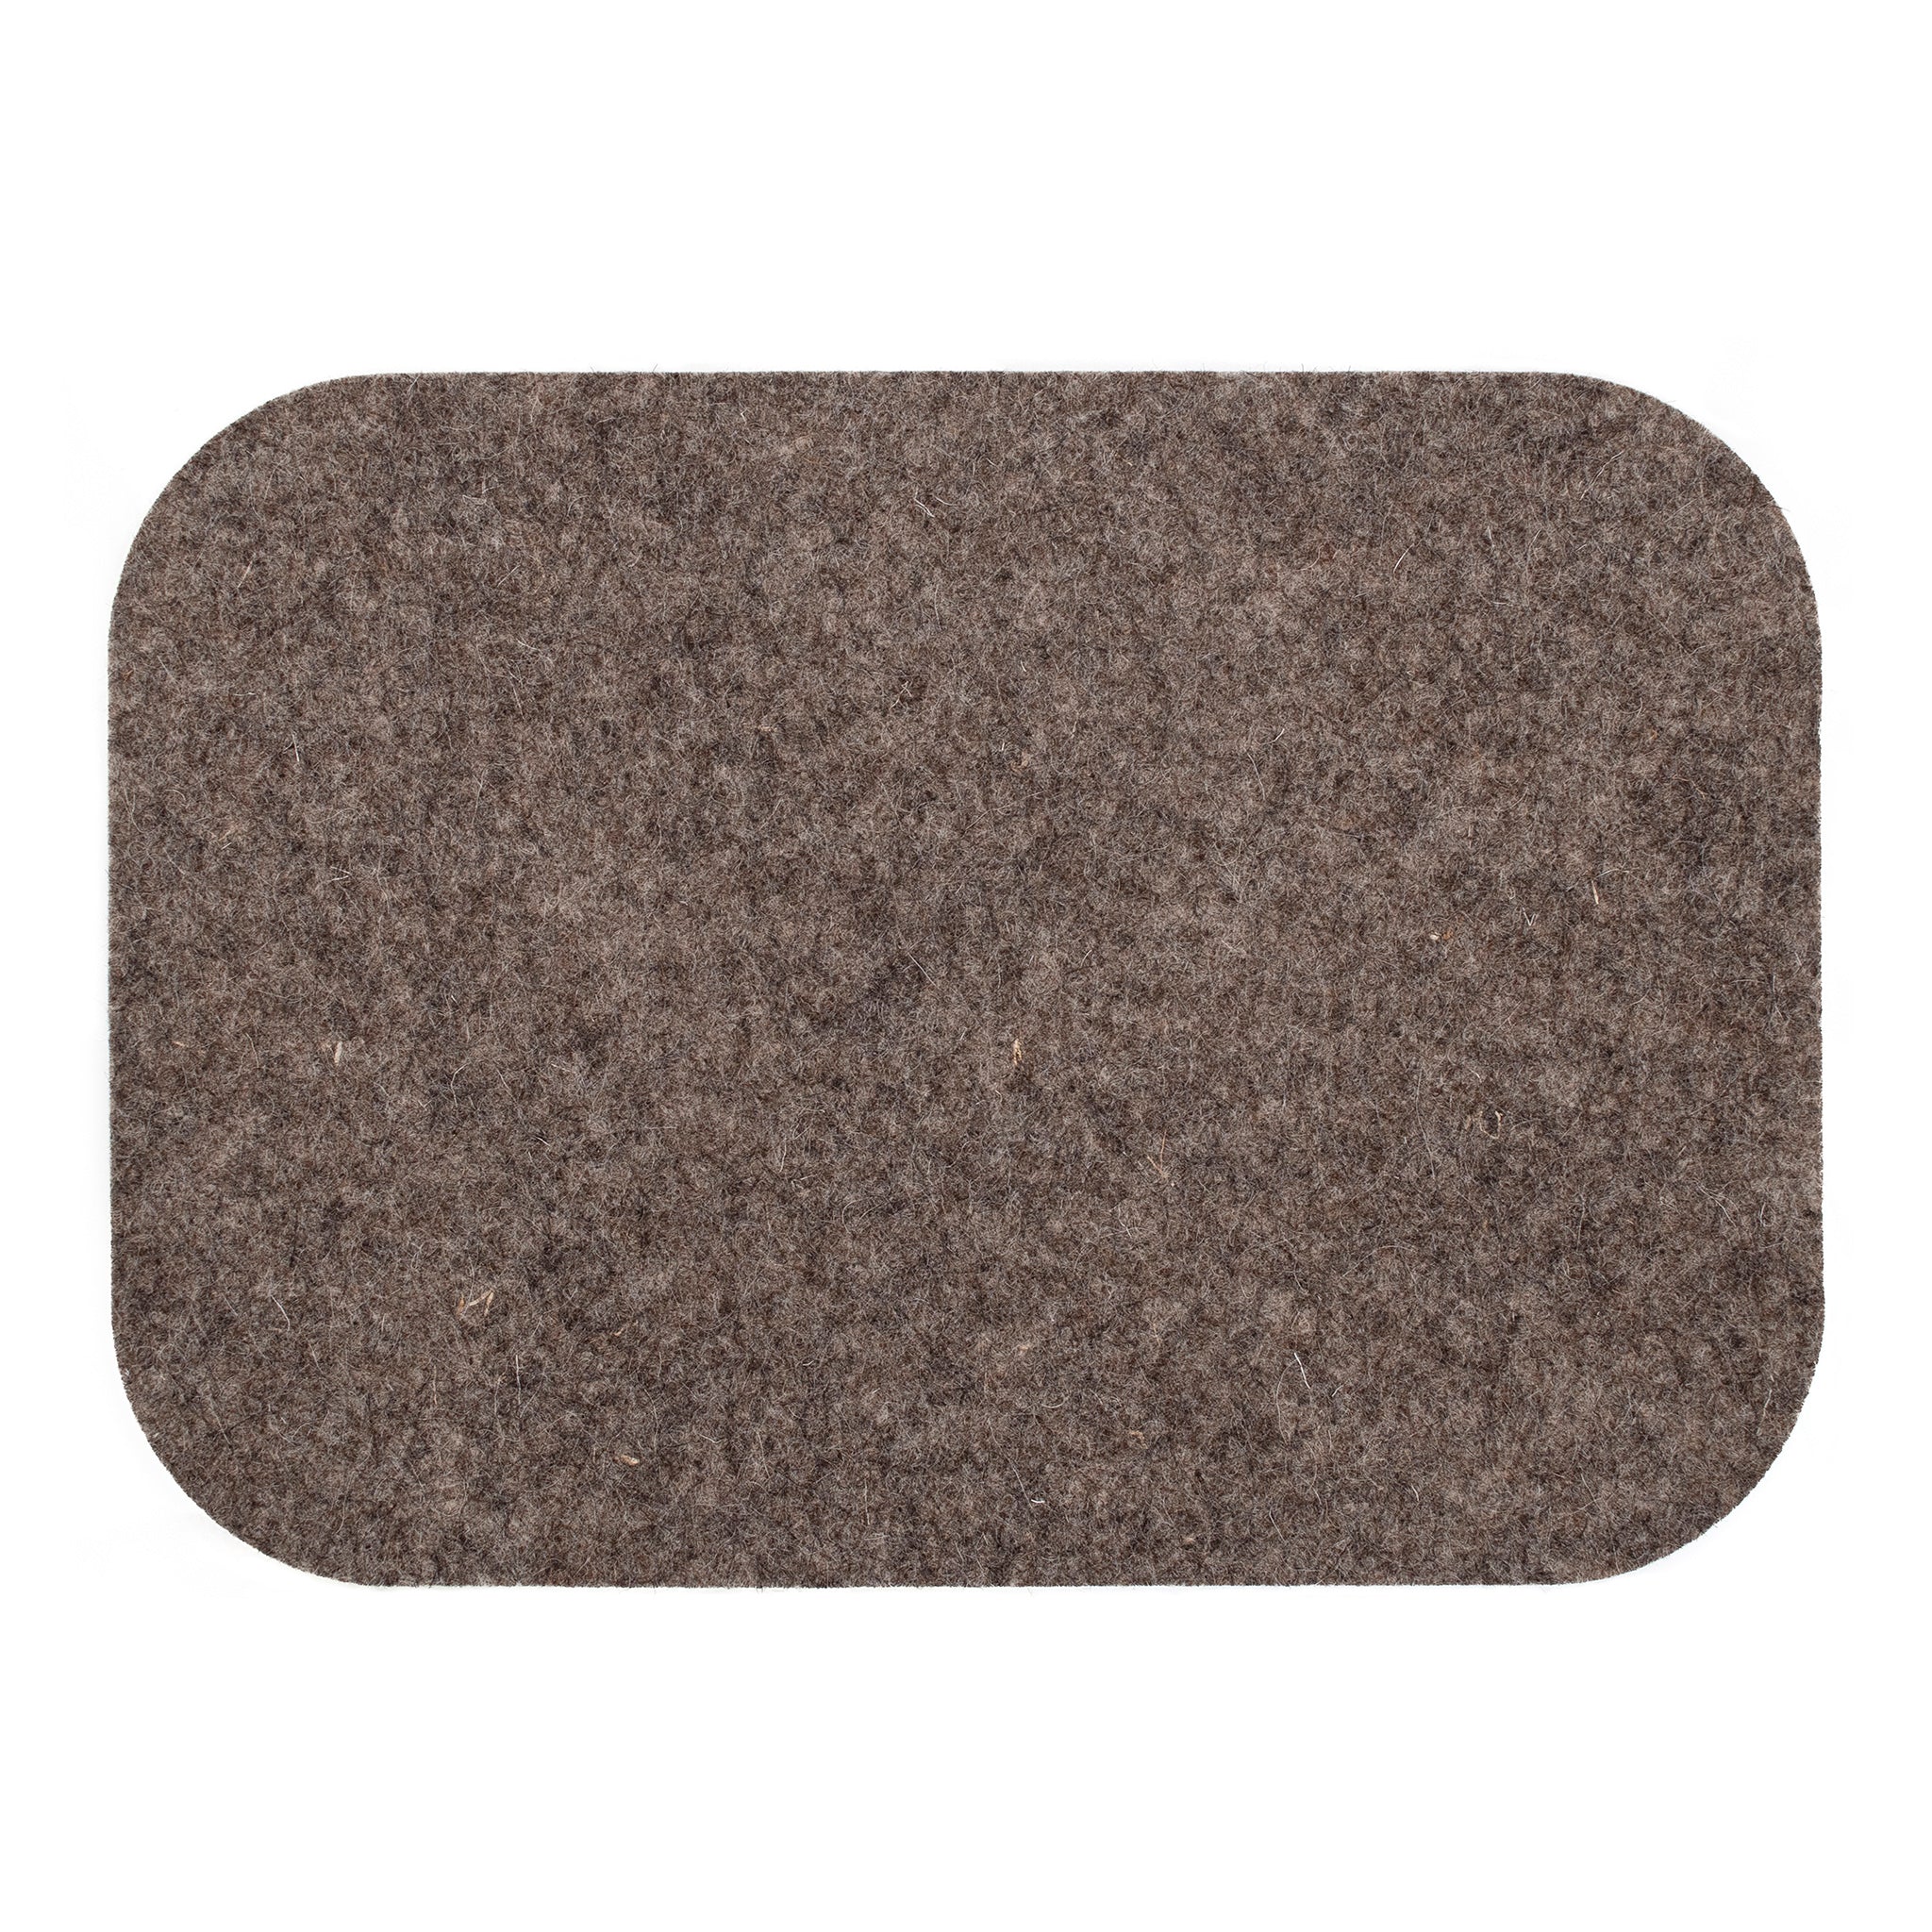 A lakeland collection luxury grey sheep's wool felted placemat, placed on a white background